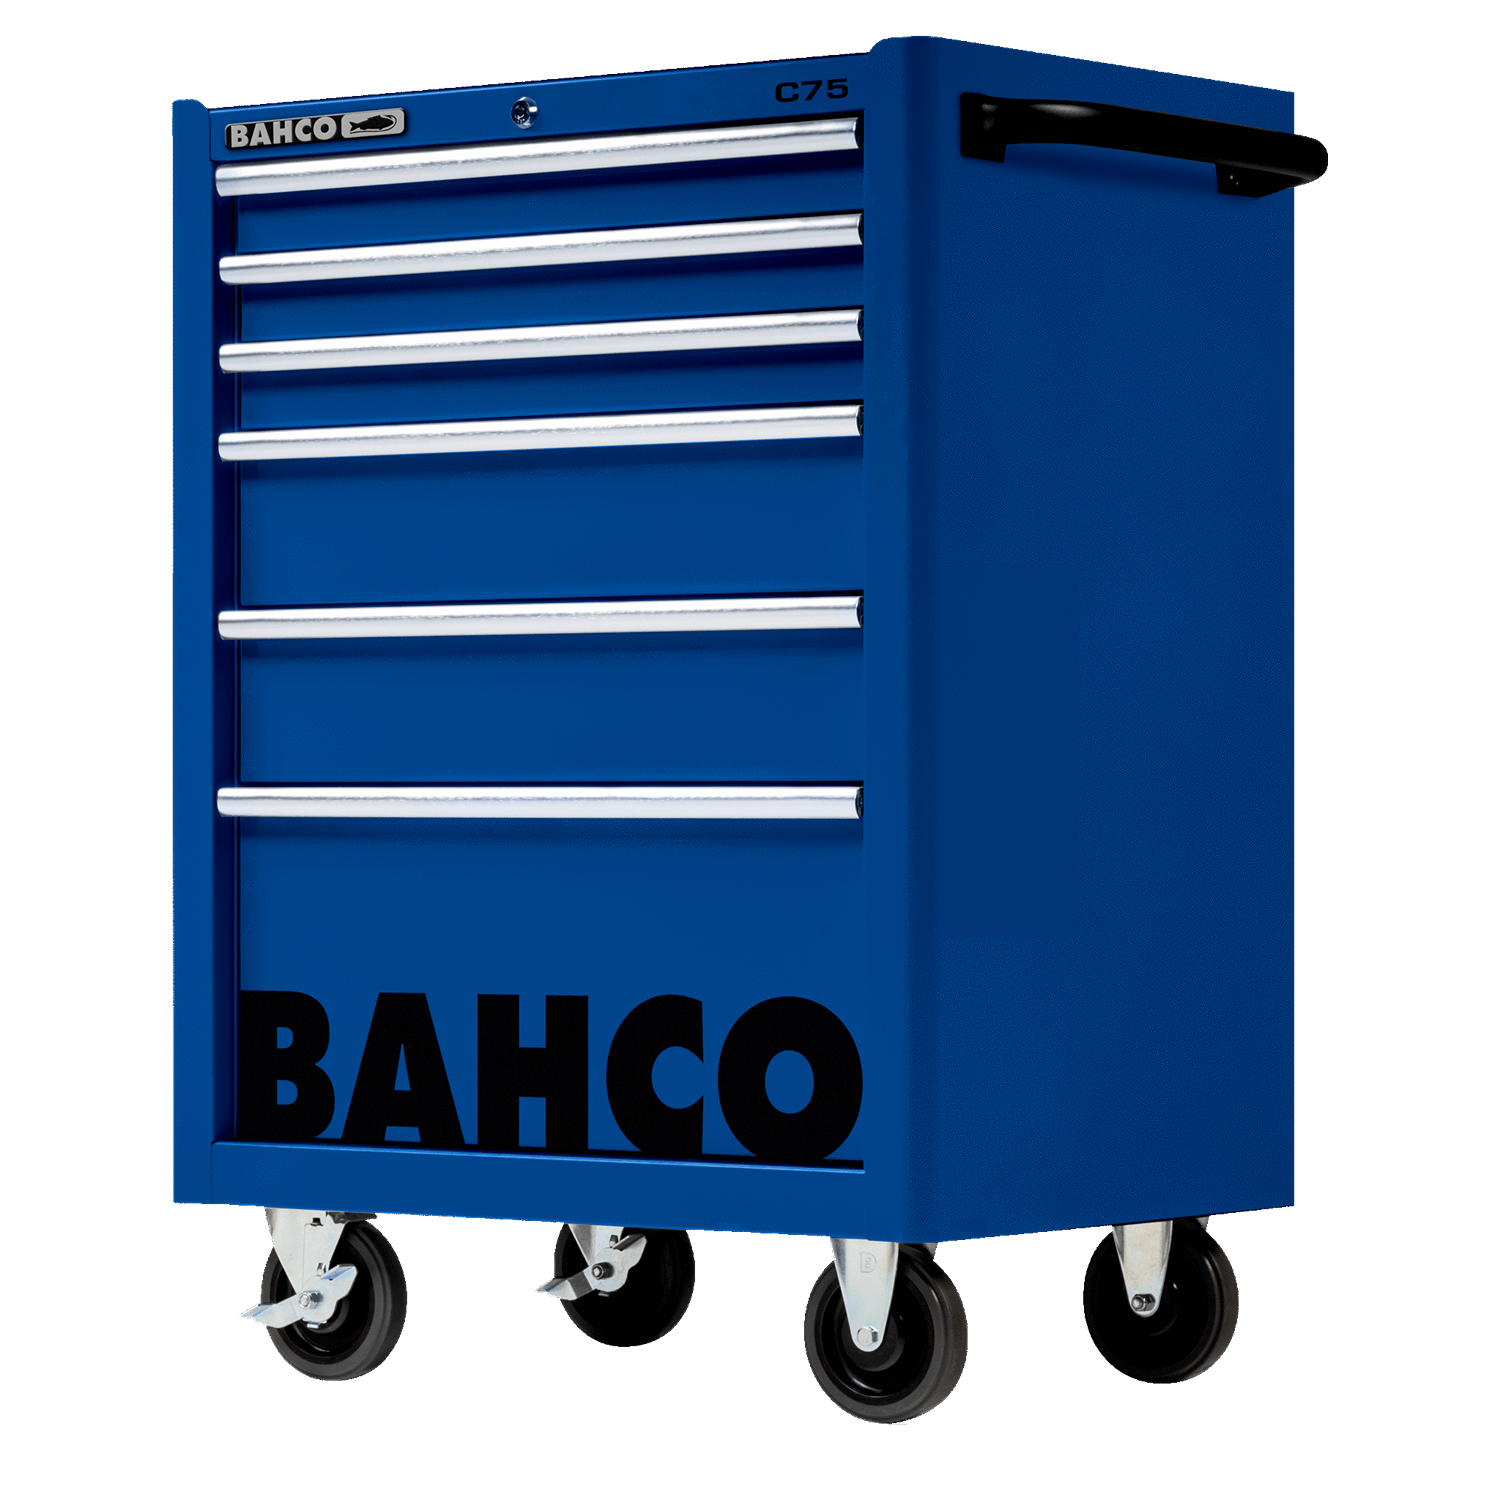 BAHCO 1475K6 26” Classic C75 Tool Trolleys with 6 Drawers - Premium Tool Trolley from BAHCO - Shop now at Yew Aik.